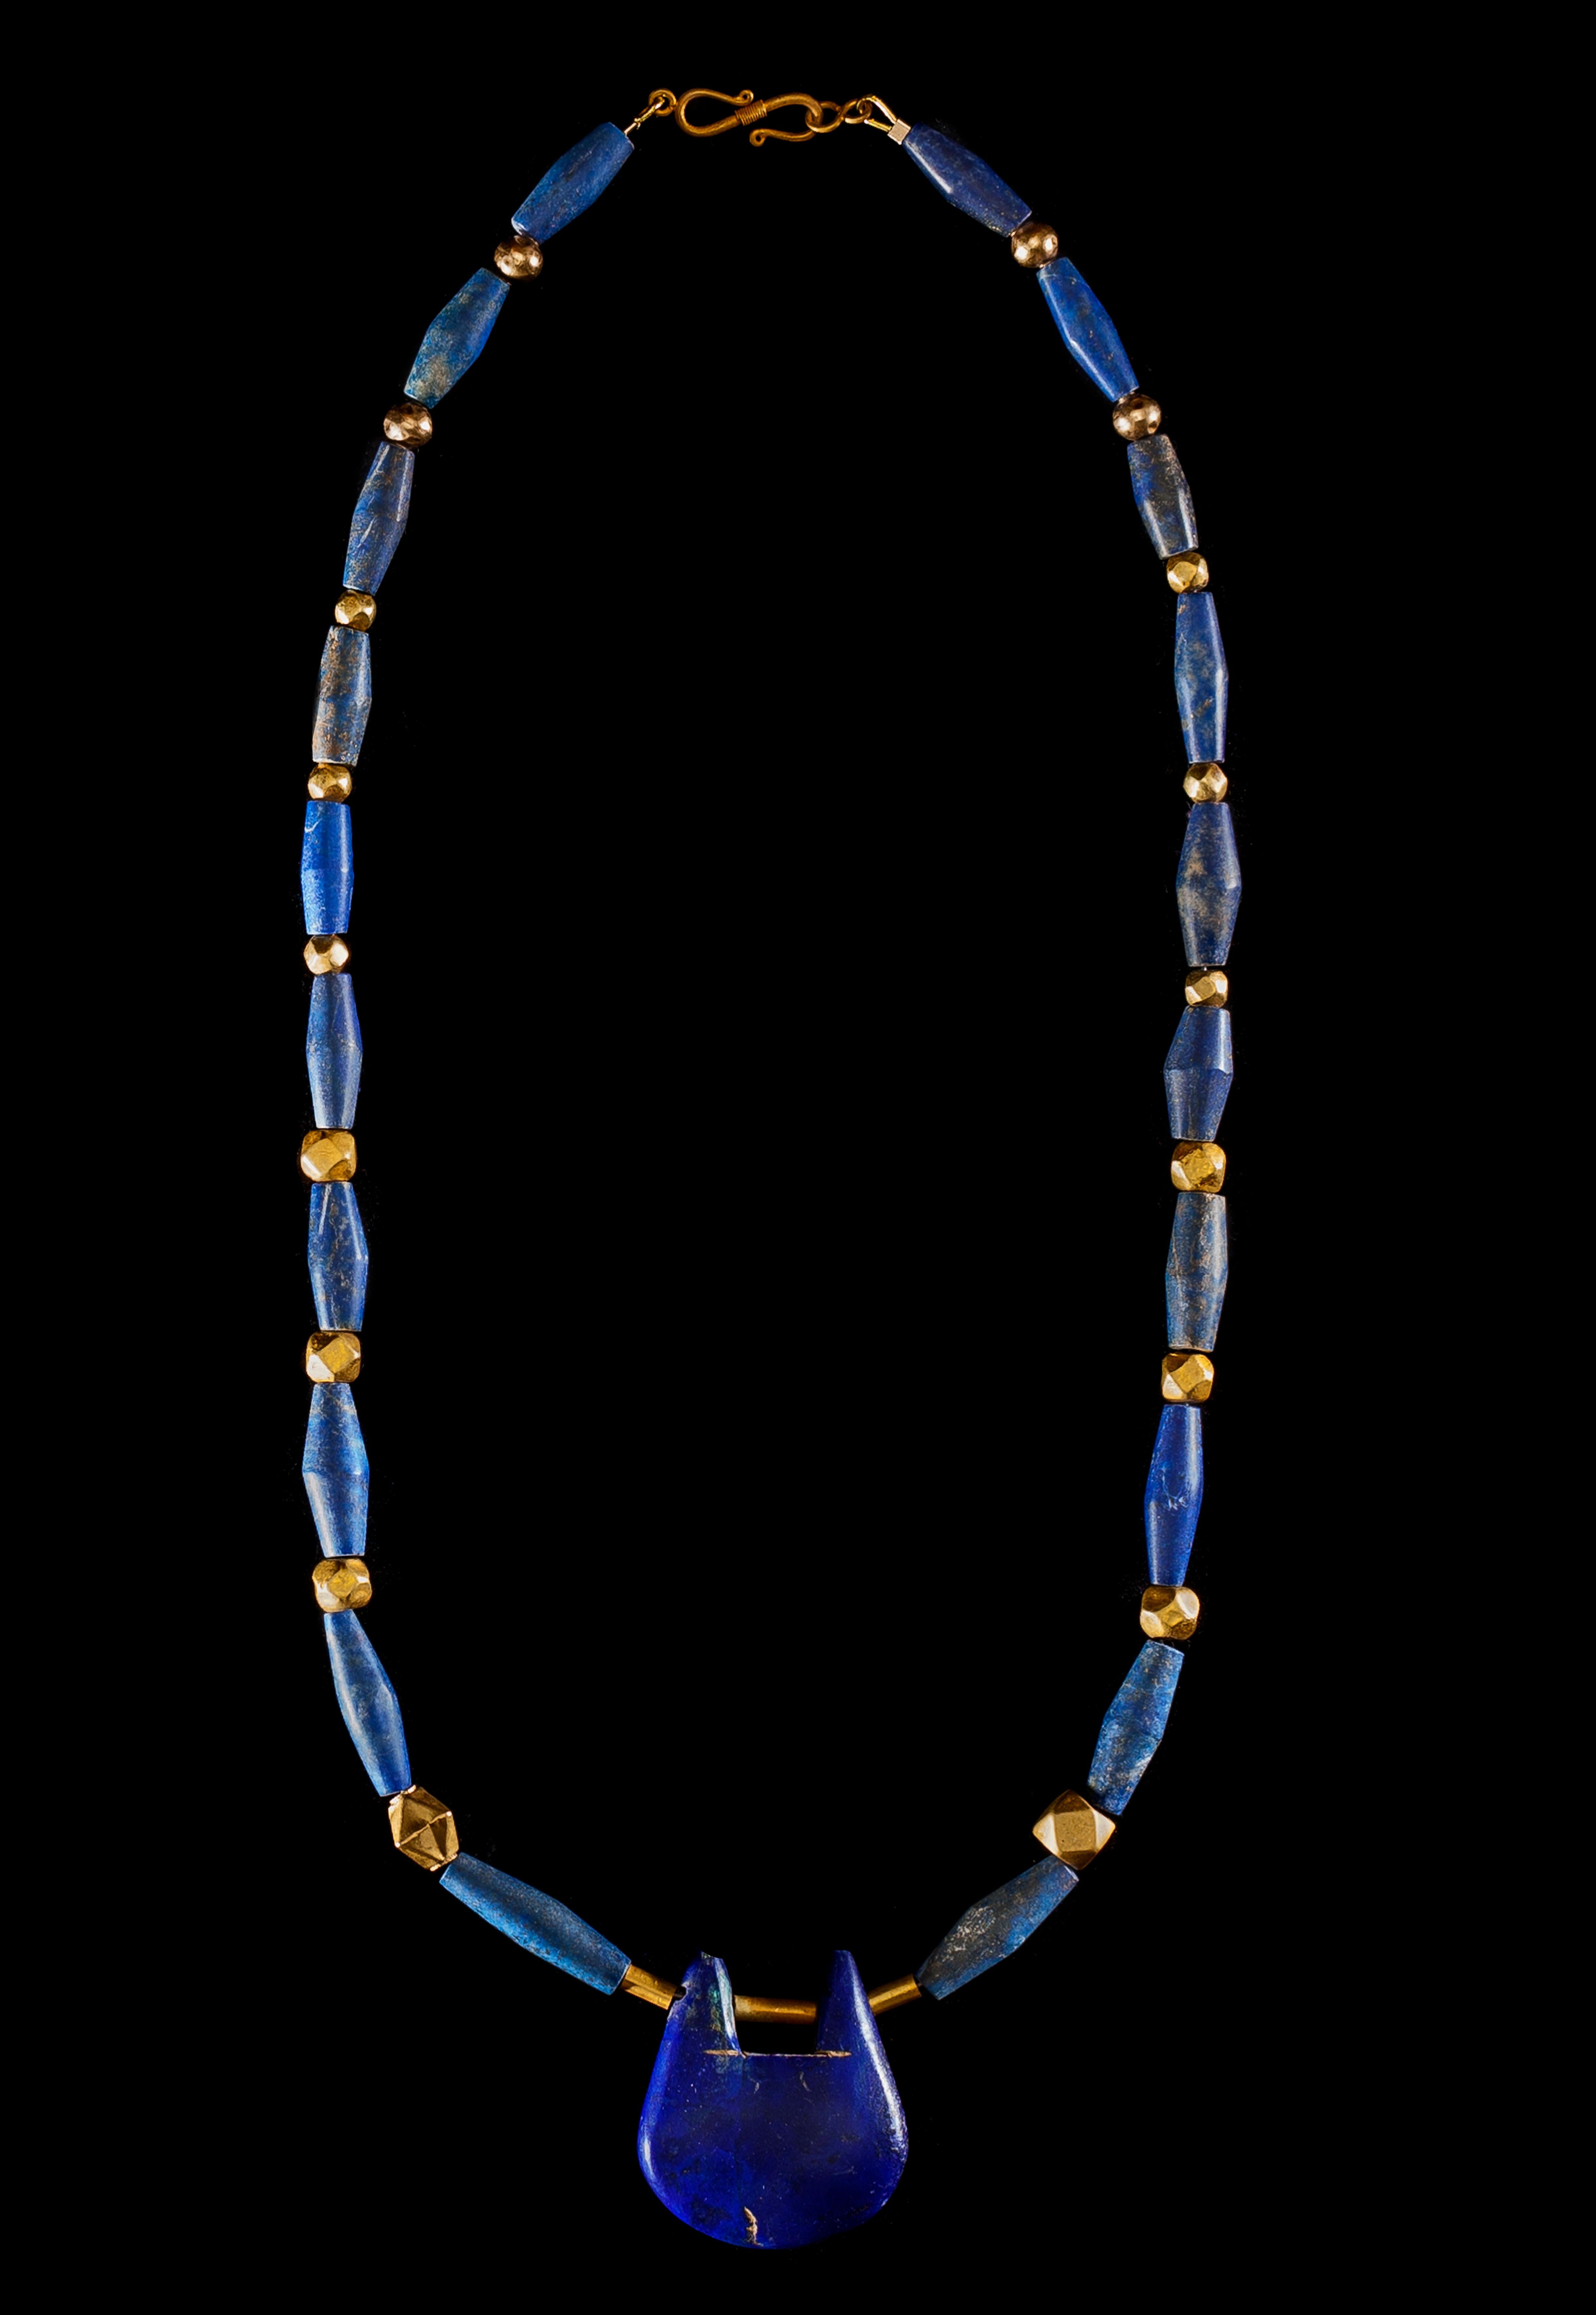 Bactrian culture spread across a wide area of modern-day Afghanistan and Uzbekistan and reached its zenith between 2100 and 1700 B.C. It produced many unique and distinctive objects and jewellery. 

This Bactrian necklace consists of impressively